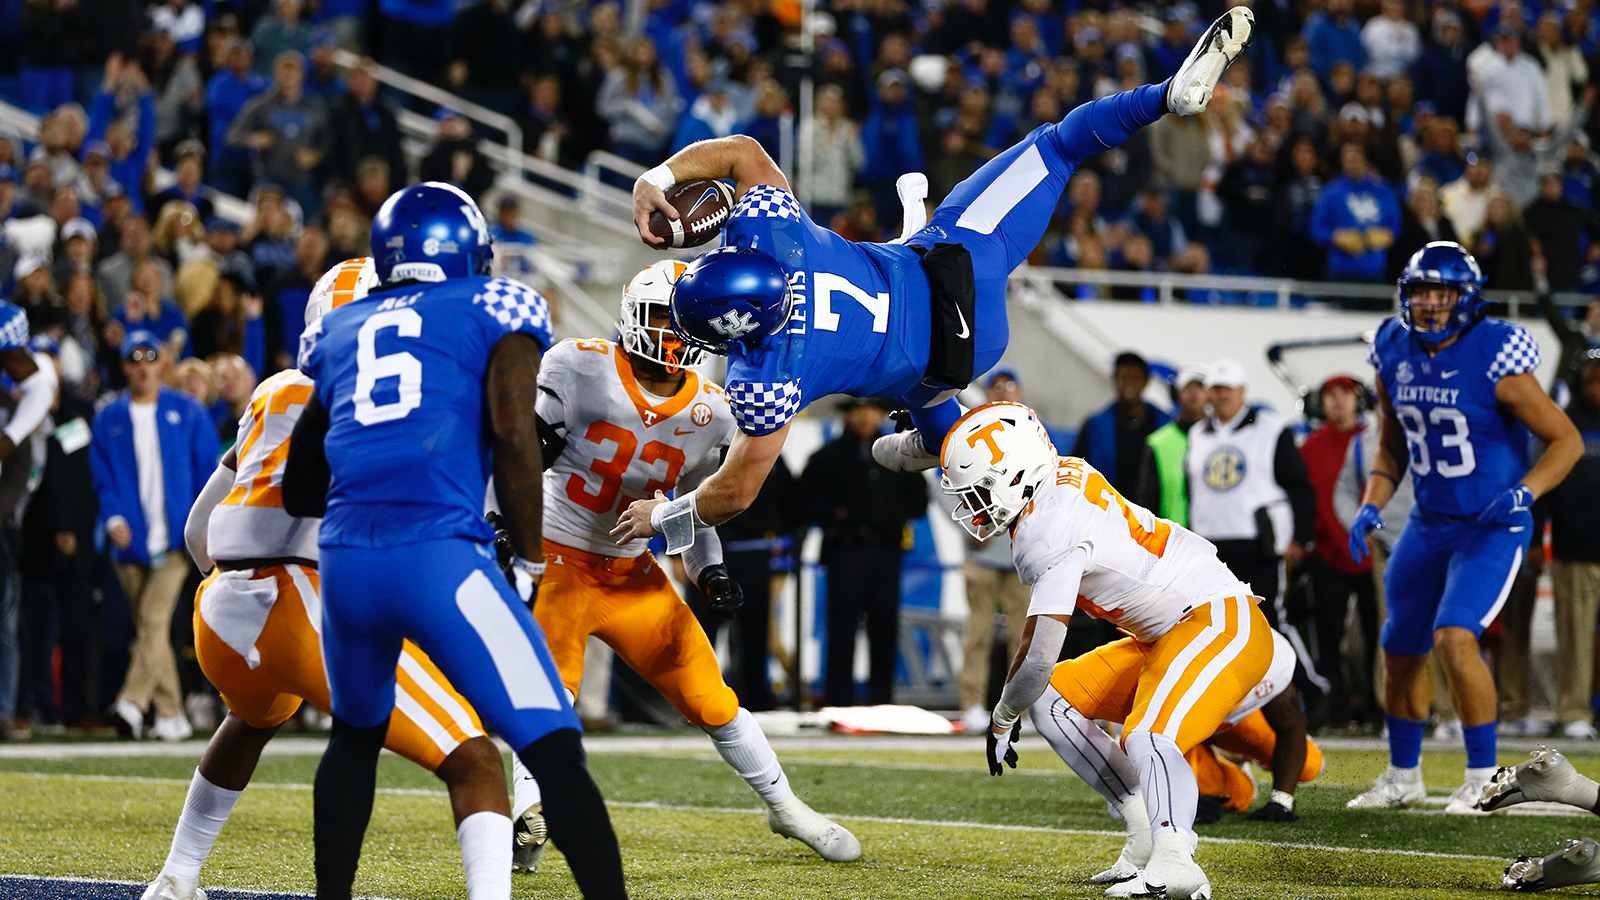 No. 18 Kentucky Comes Up Just Short, Falling to Tennessee